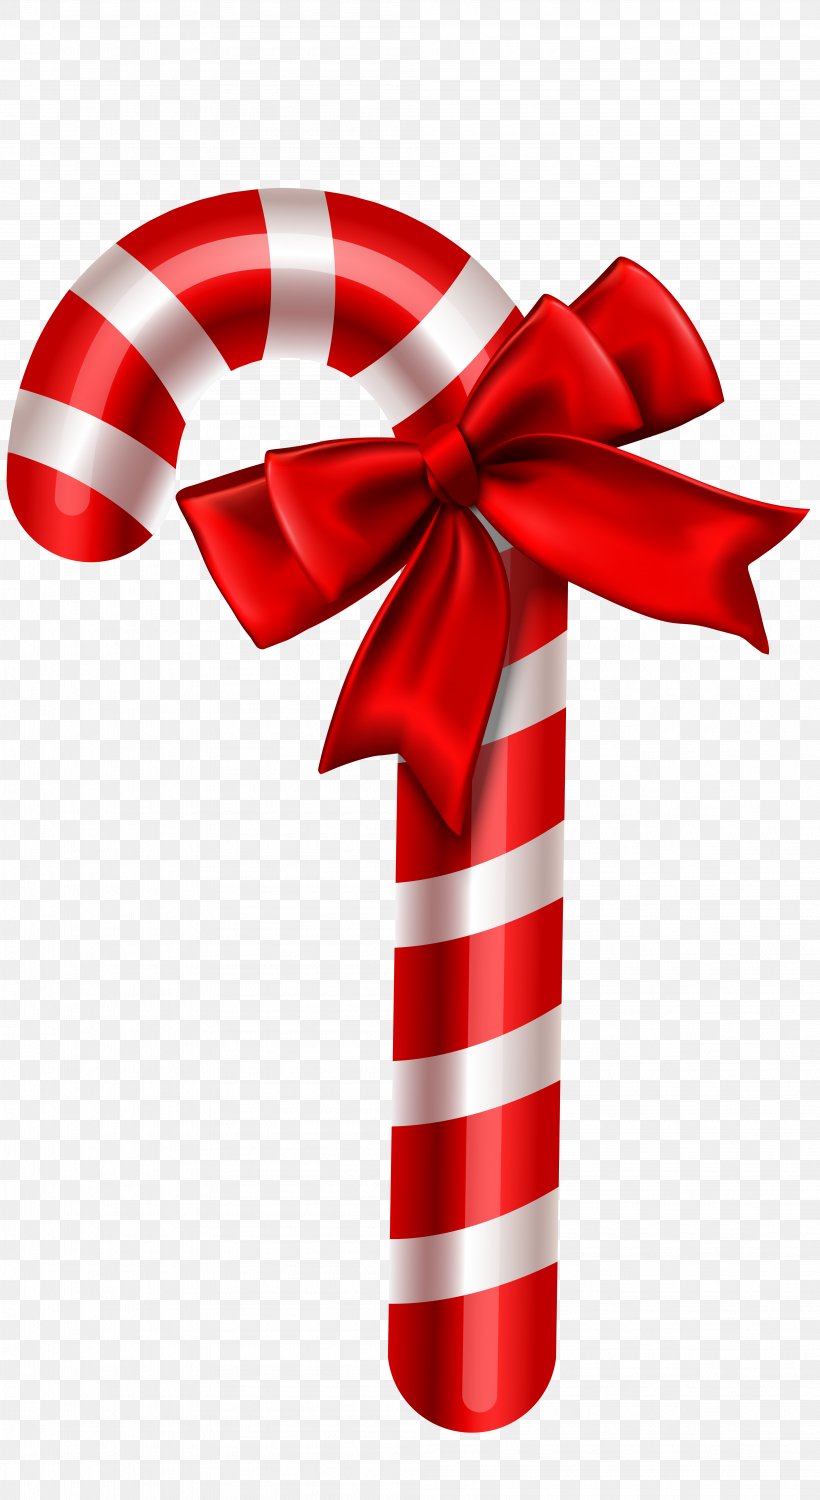 Candy Cane Christmas Ornament Clip Art, PNG, 3987x7294px, Candy Cane, Candy, Chocolate, Christmas, Christmas Decoration Download Free